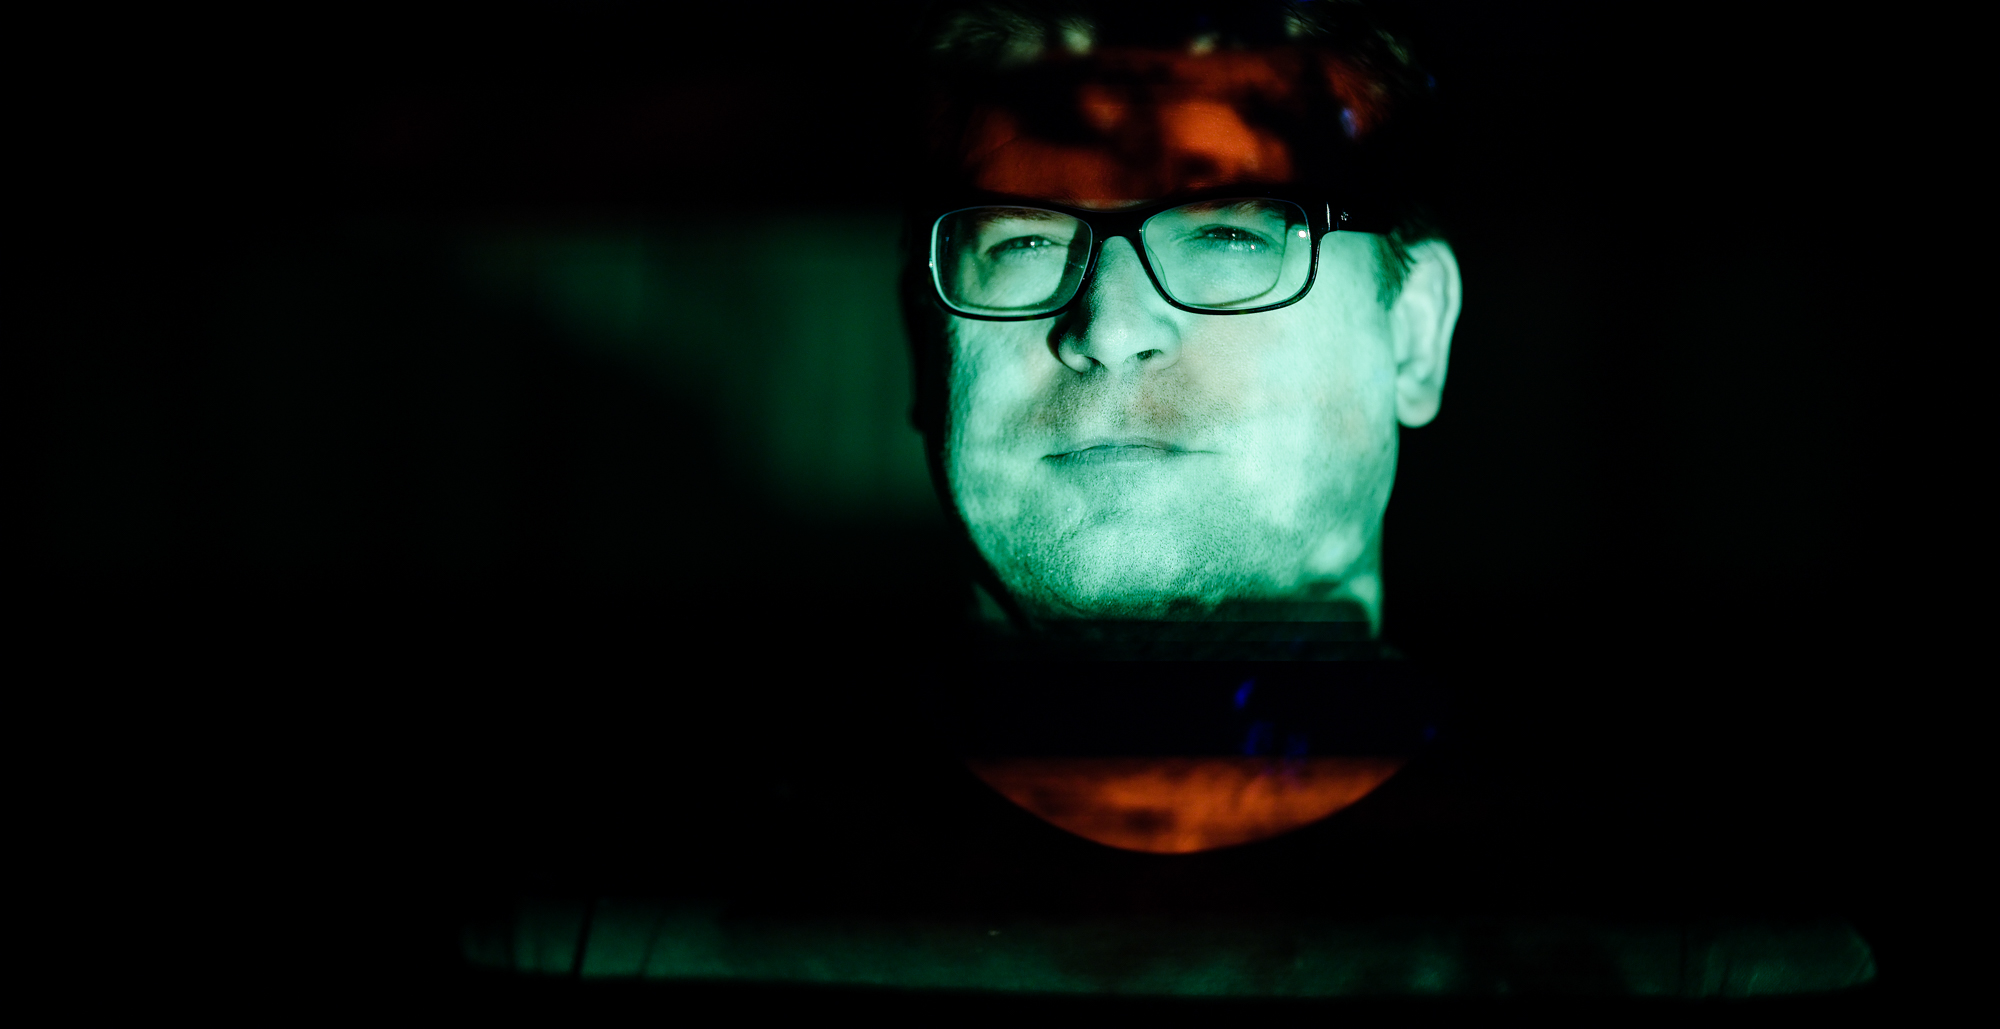 Man in glasses stands with projector video shining on face.